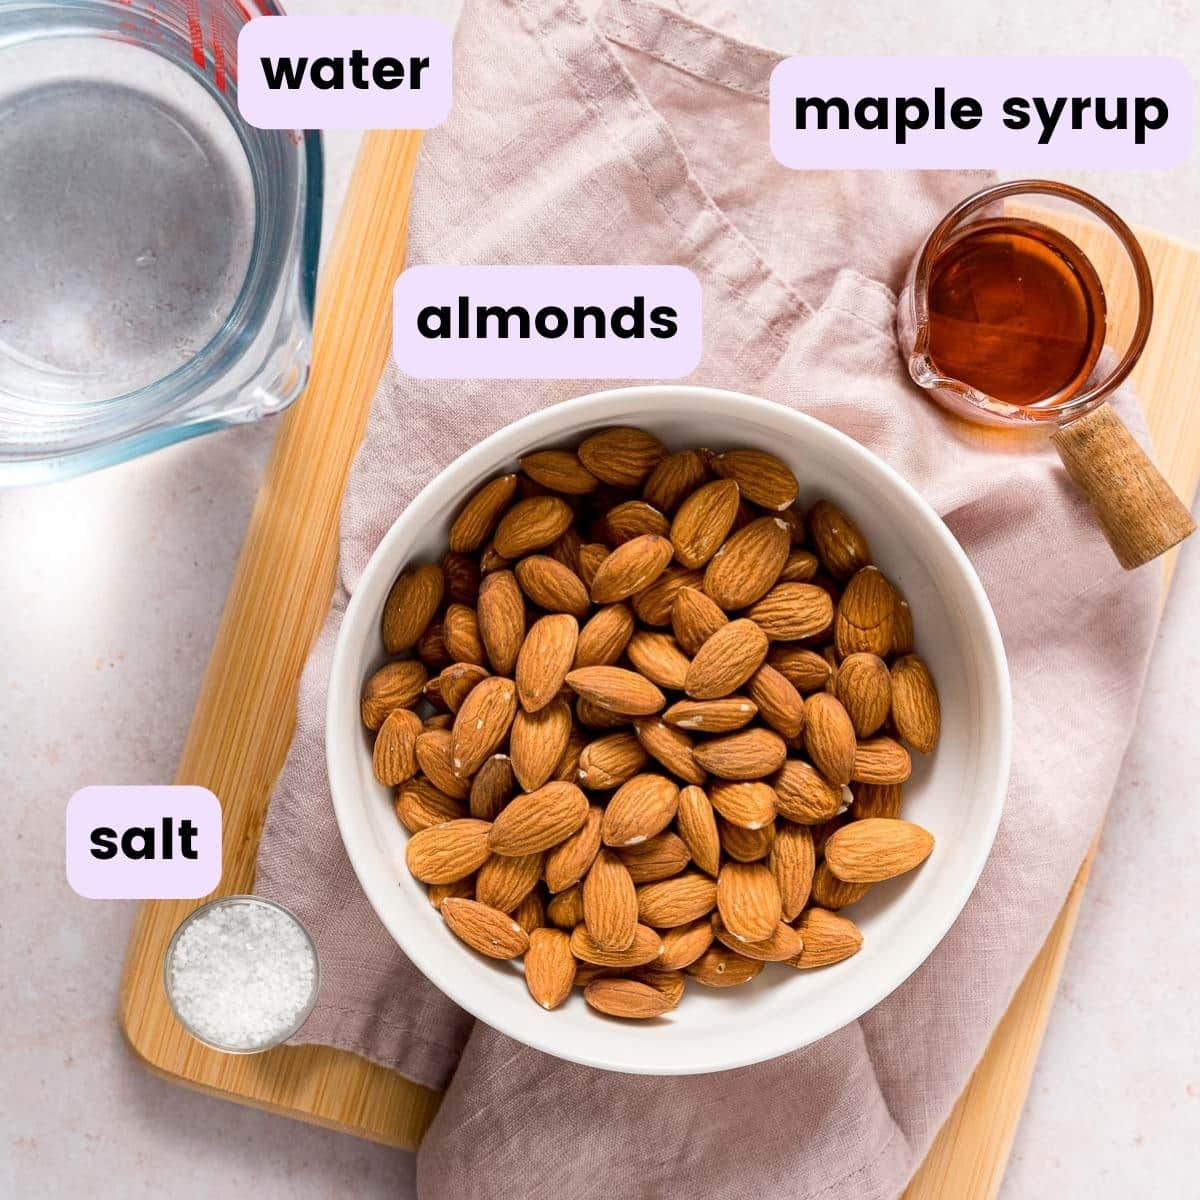 the ingredients needed to make almond milk